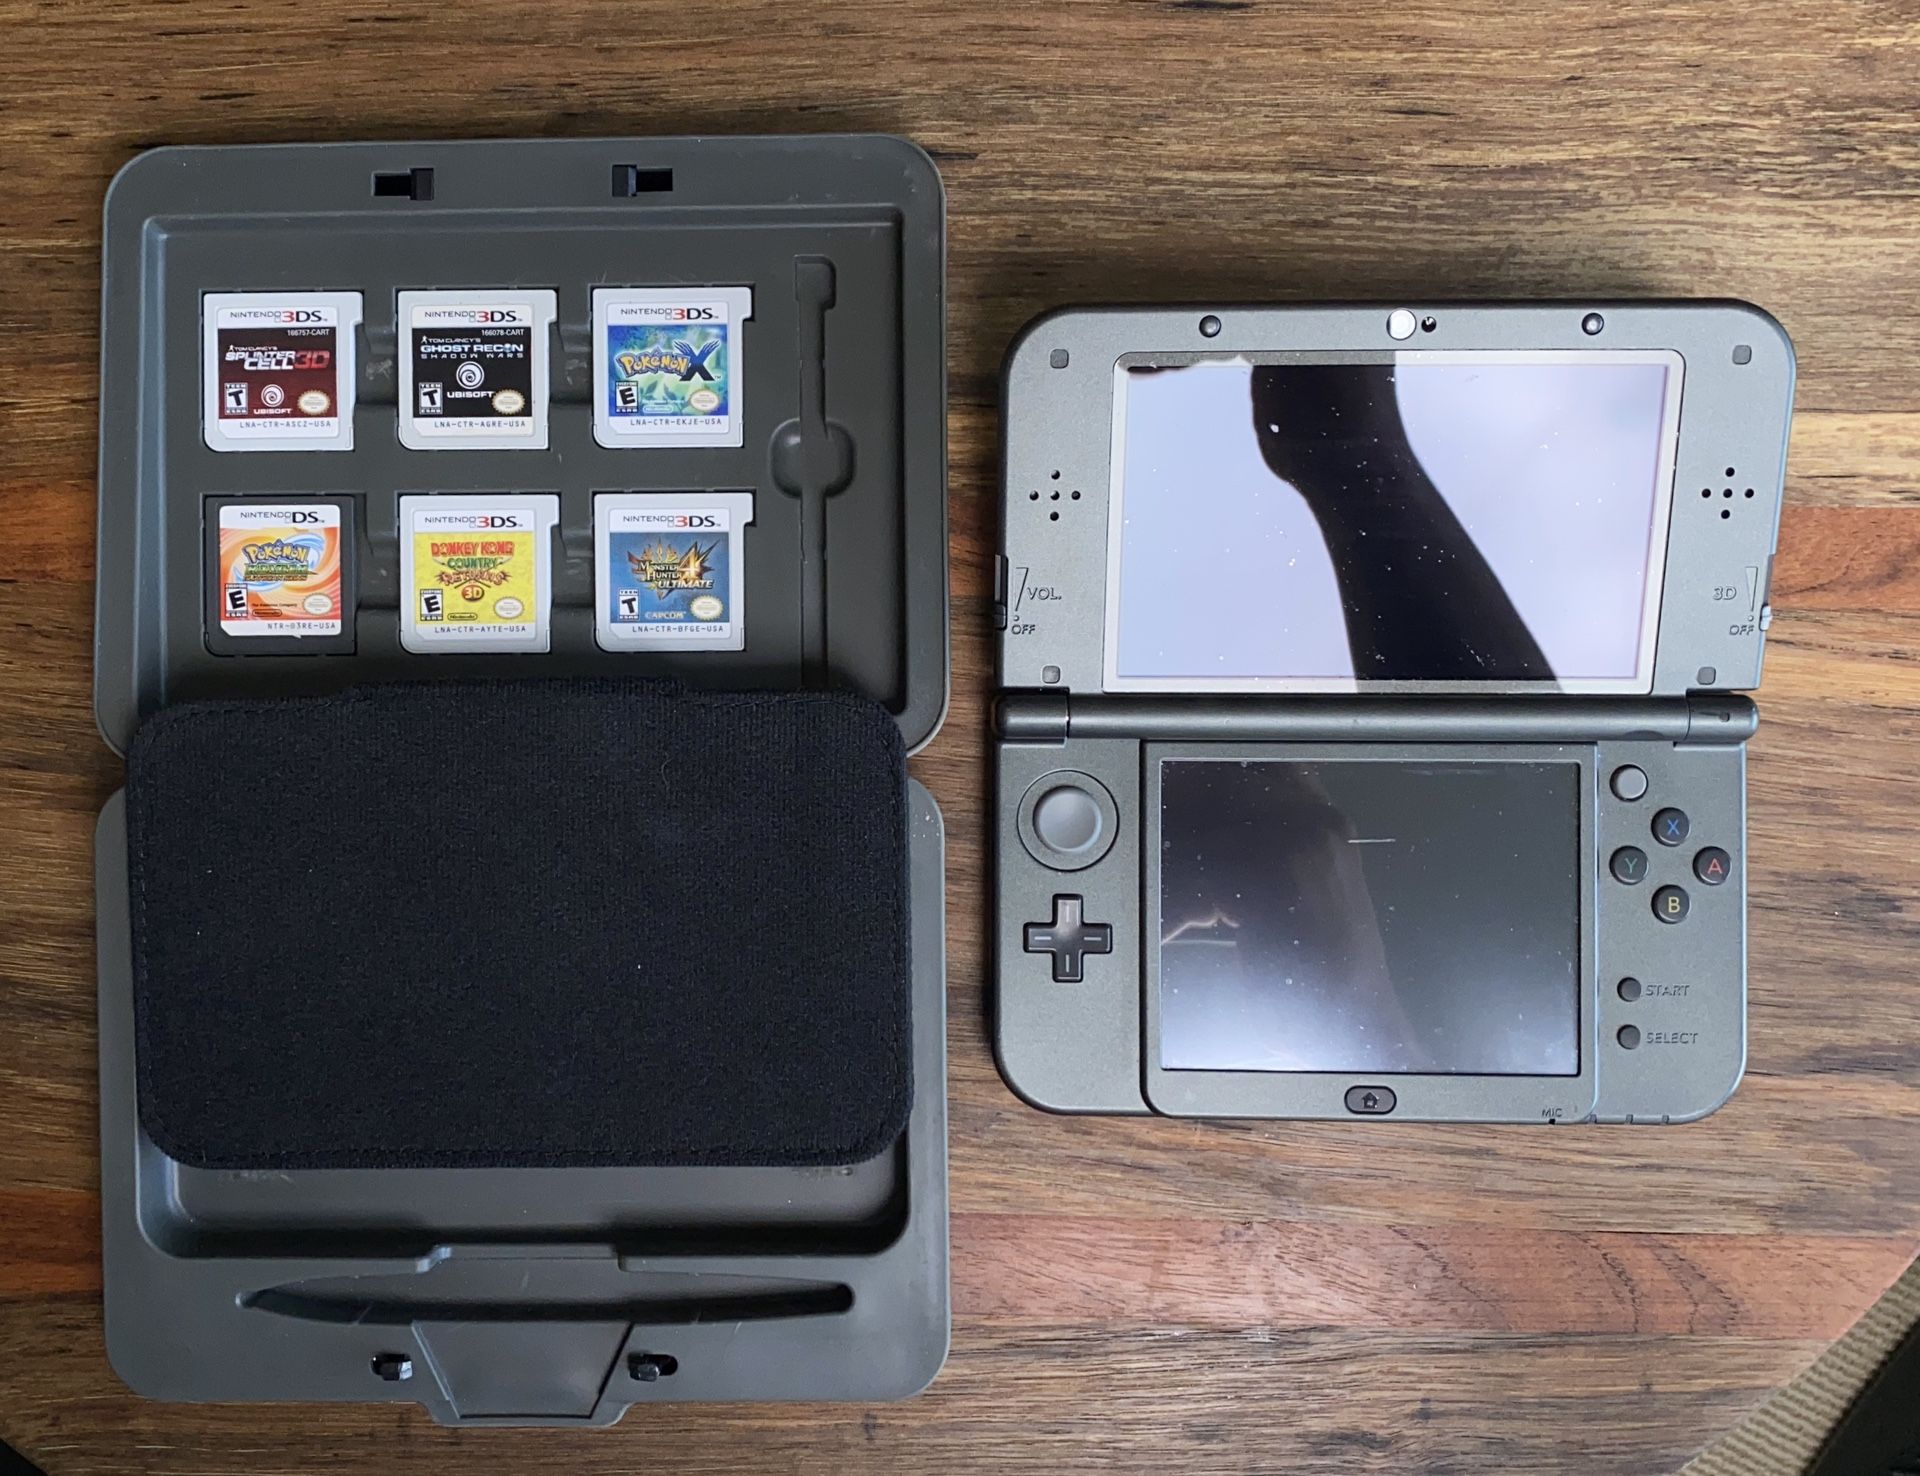 Nintendo 3DS XL with Games